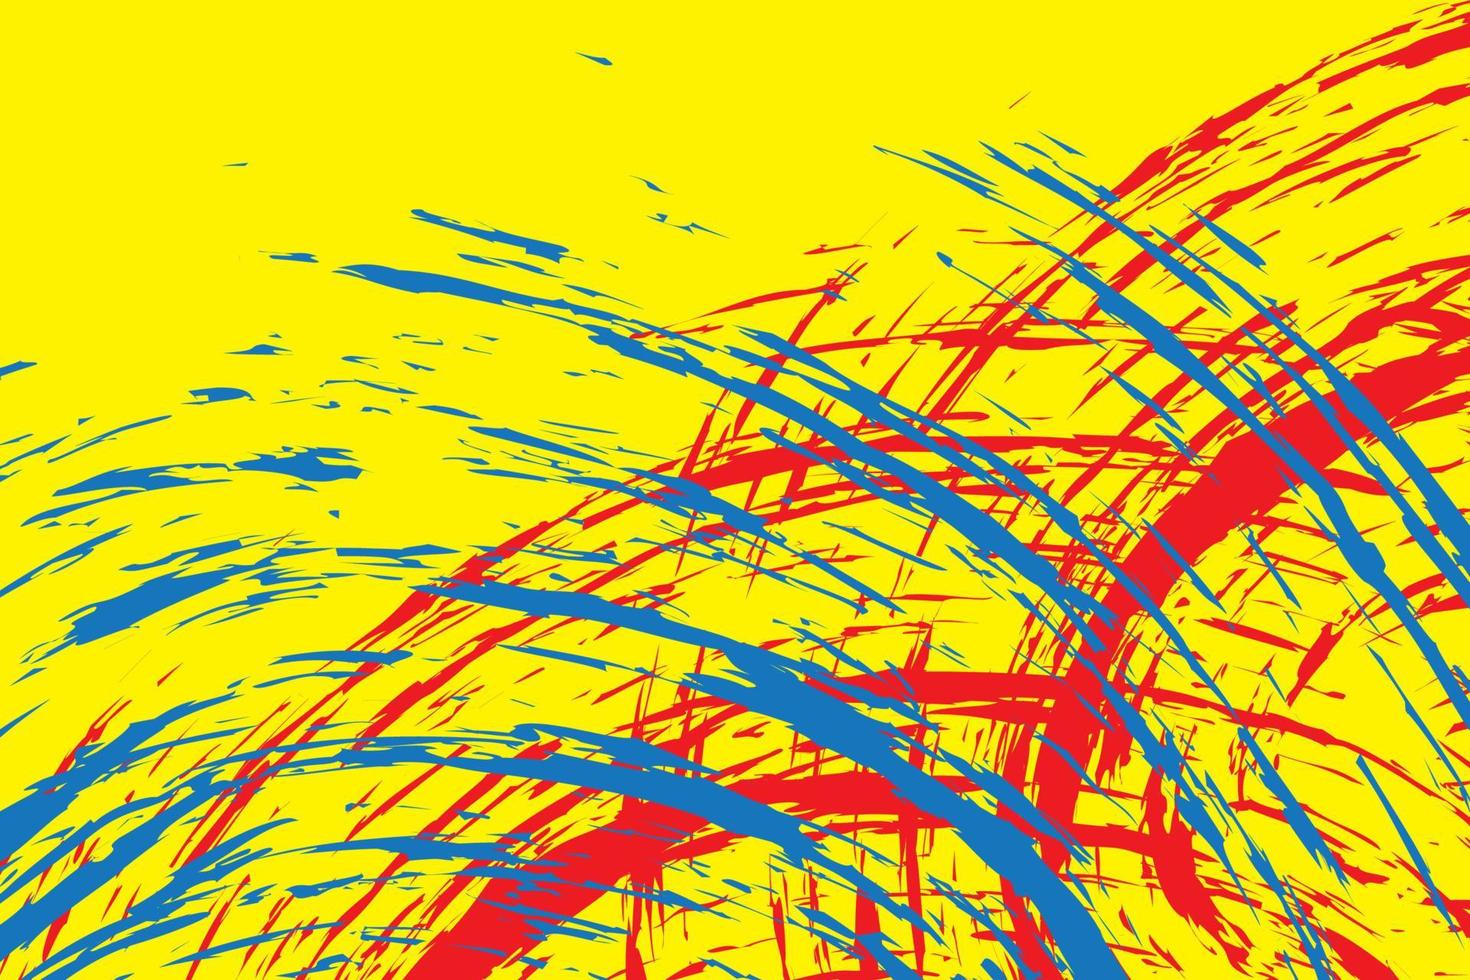 Primary colors background, blue, red, and yellow.Modern design colorful art with paint brush style. Vector illustration.